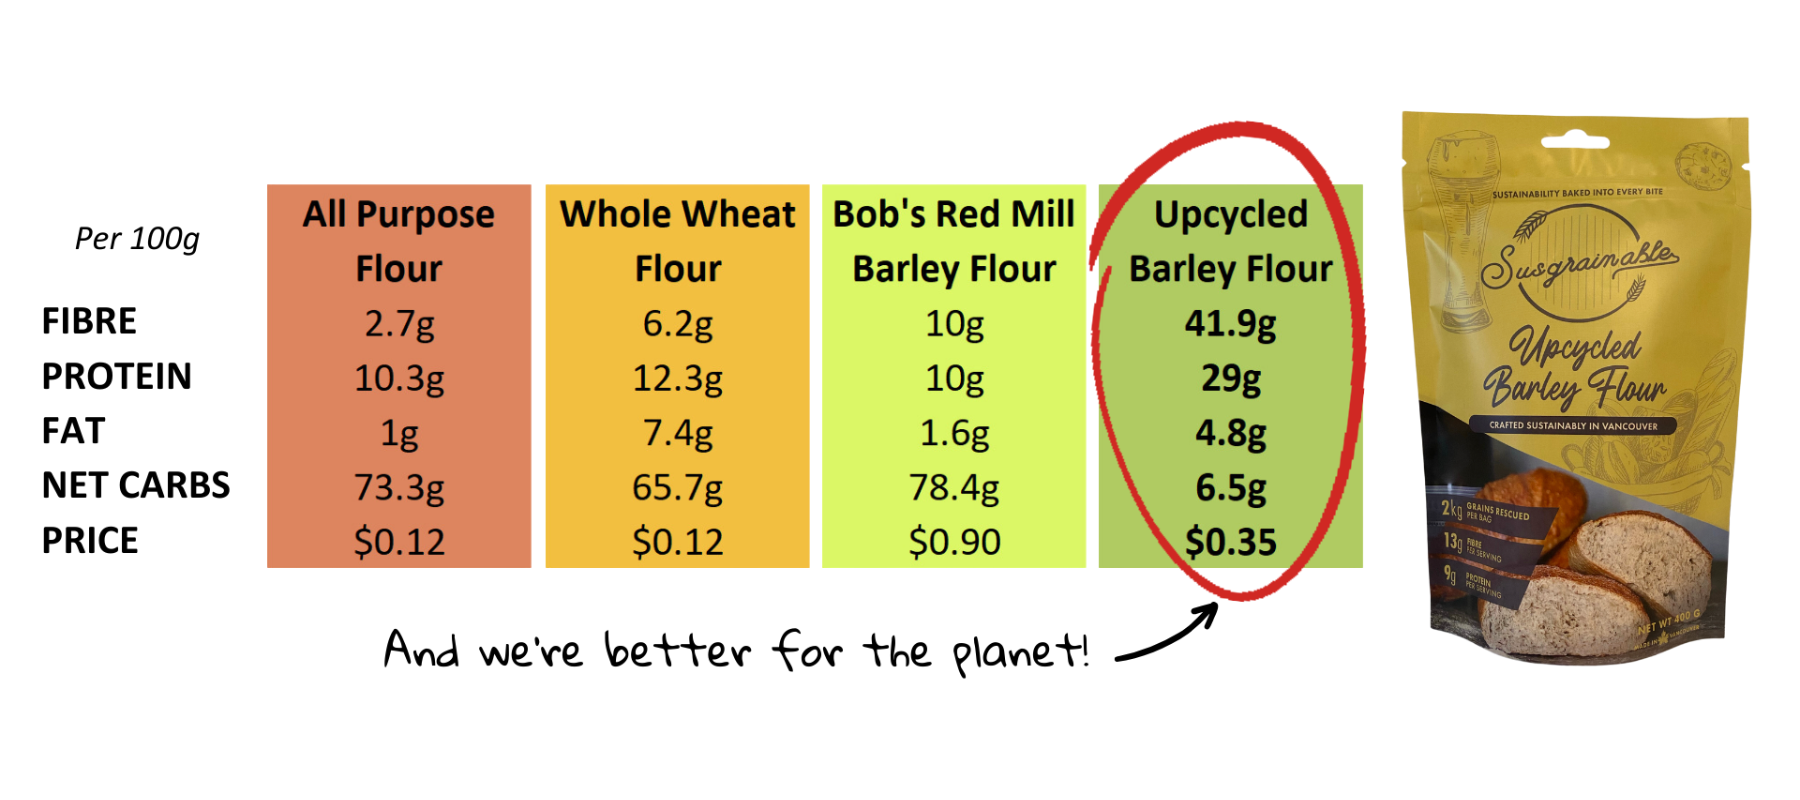 Susgrainable's Upcycled Barley Flour with nutritional comparison of different flour alternatives.